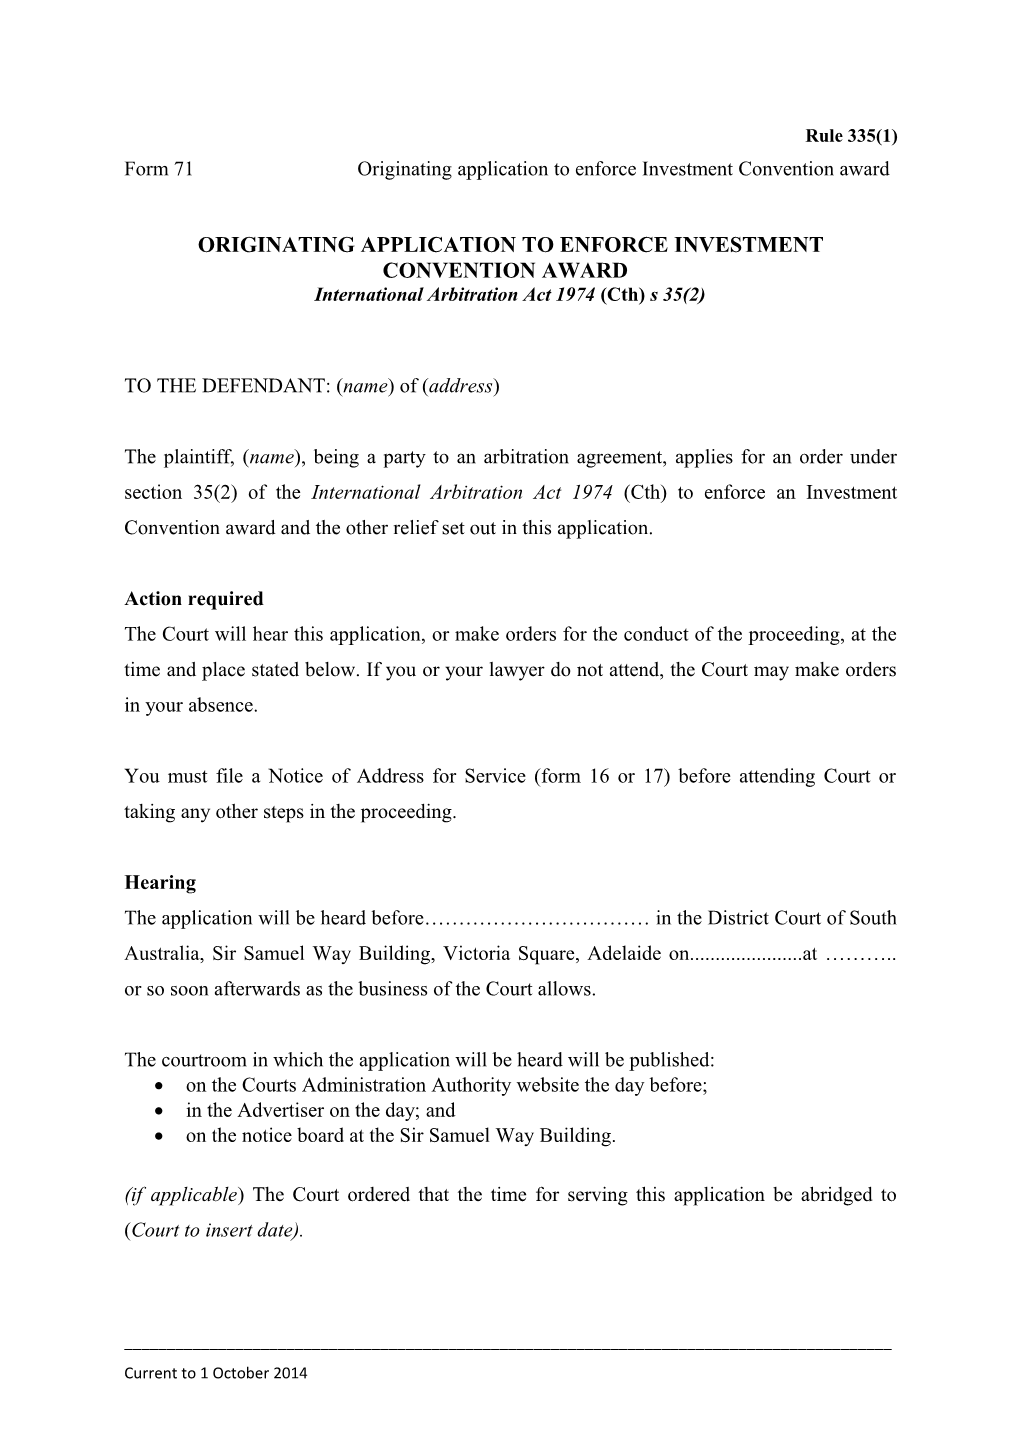 Form 71 - Originating Application to Enforce Investment Convention Award